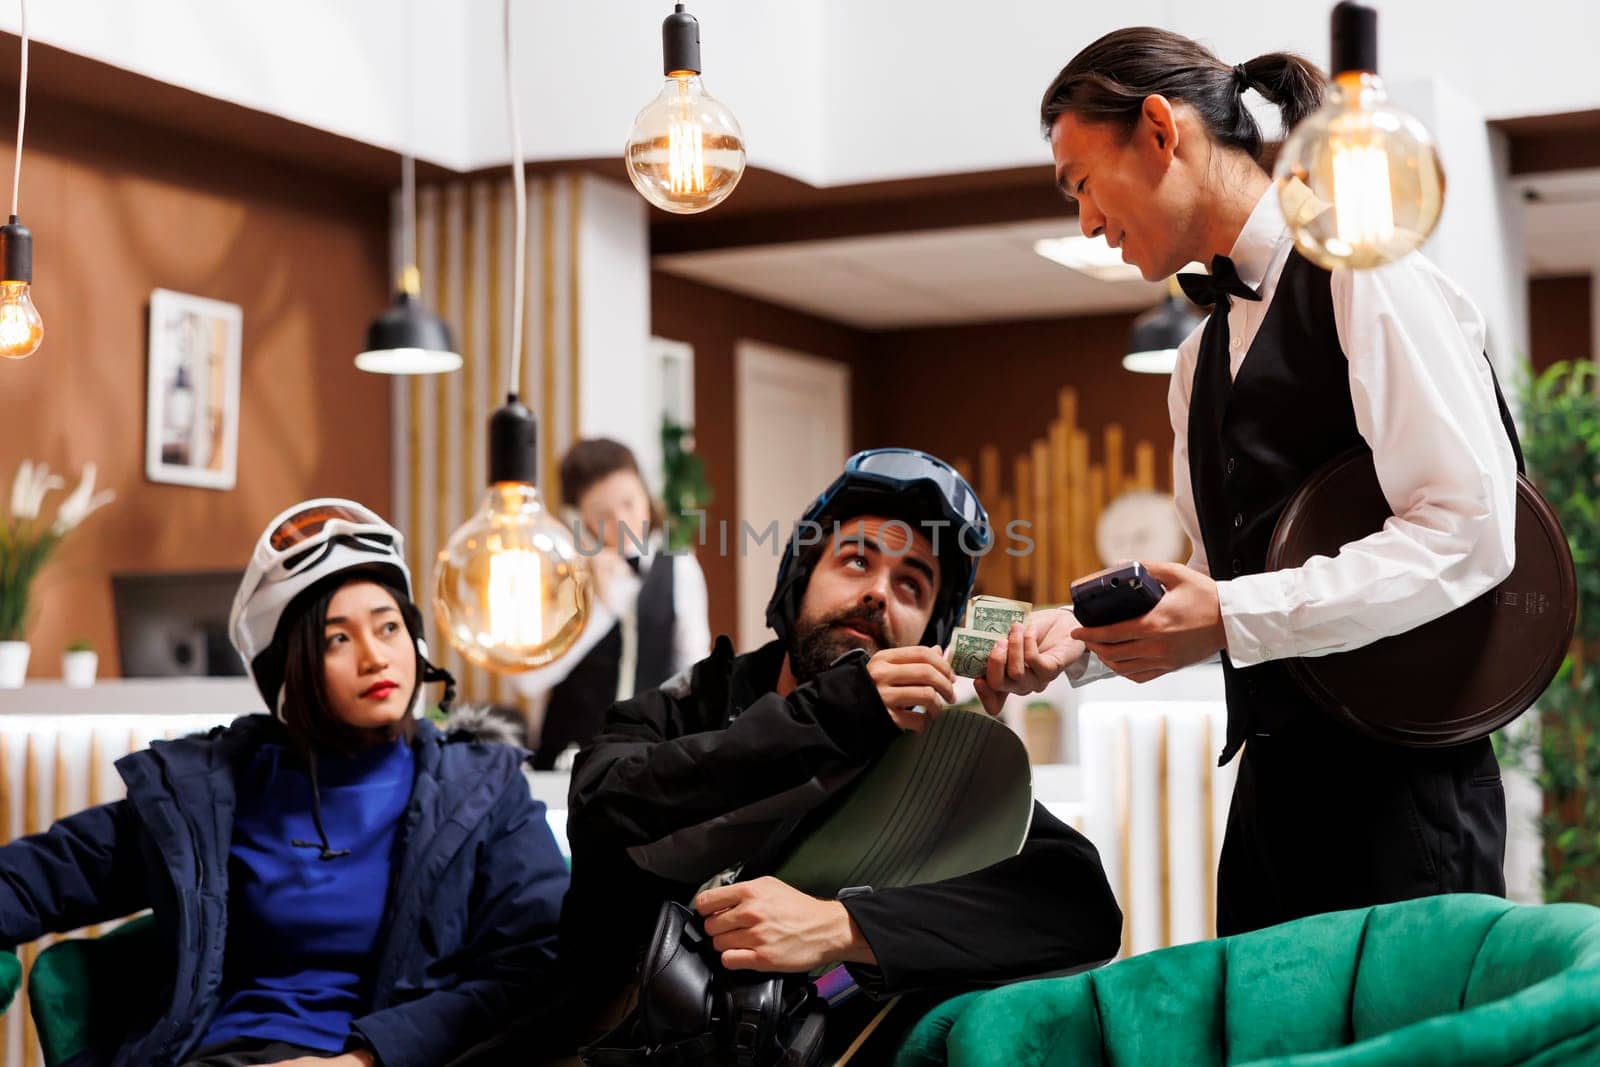 Friendly asian waiter receiving money tip from couple with snow clothing in lounge area of ski mountain resort. Healthy boyfriend and girlfriend thanking employee for good service in winter vacation.